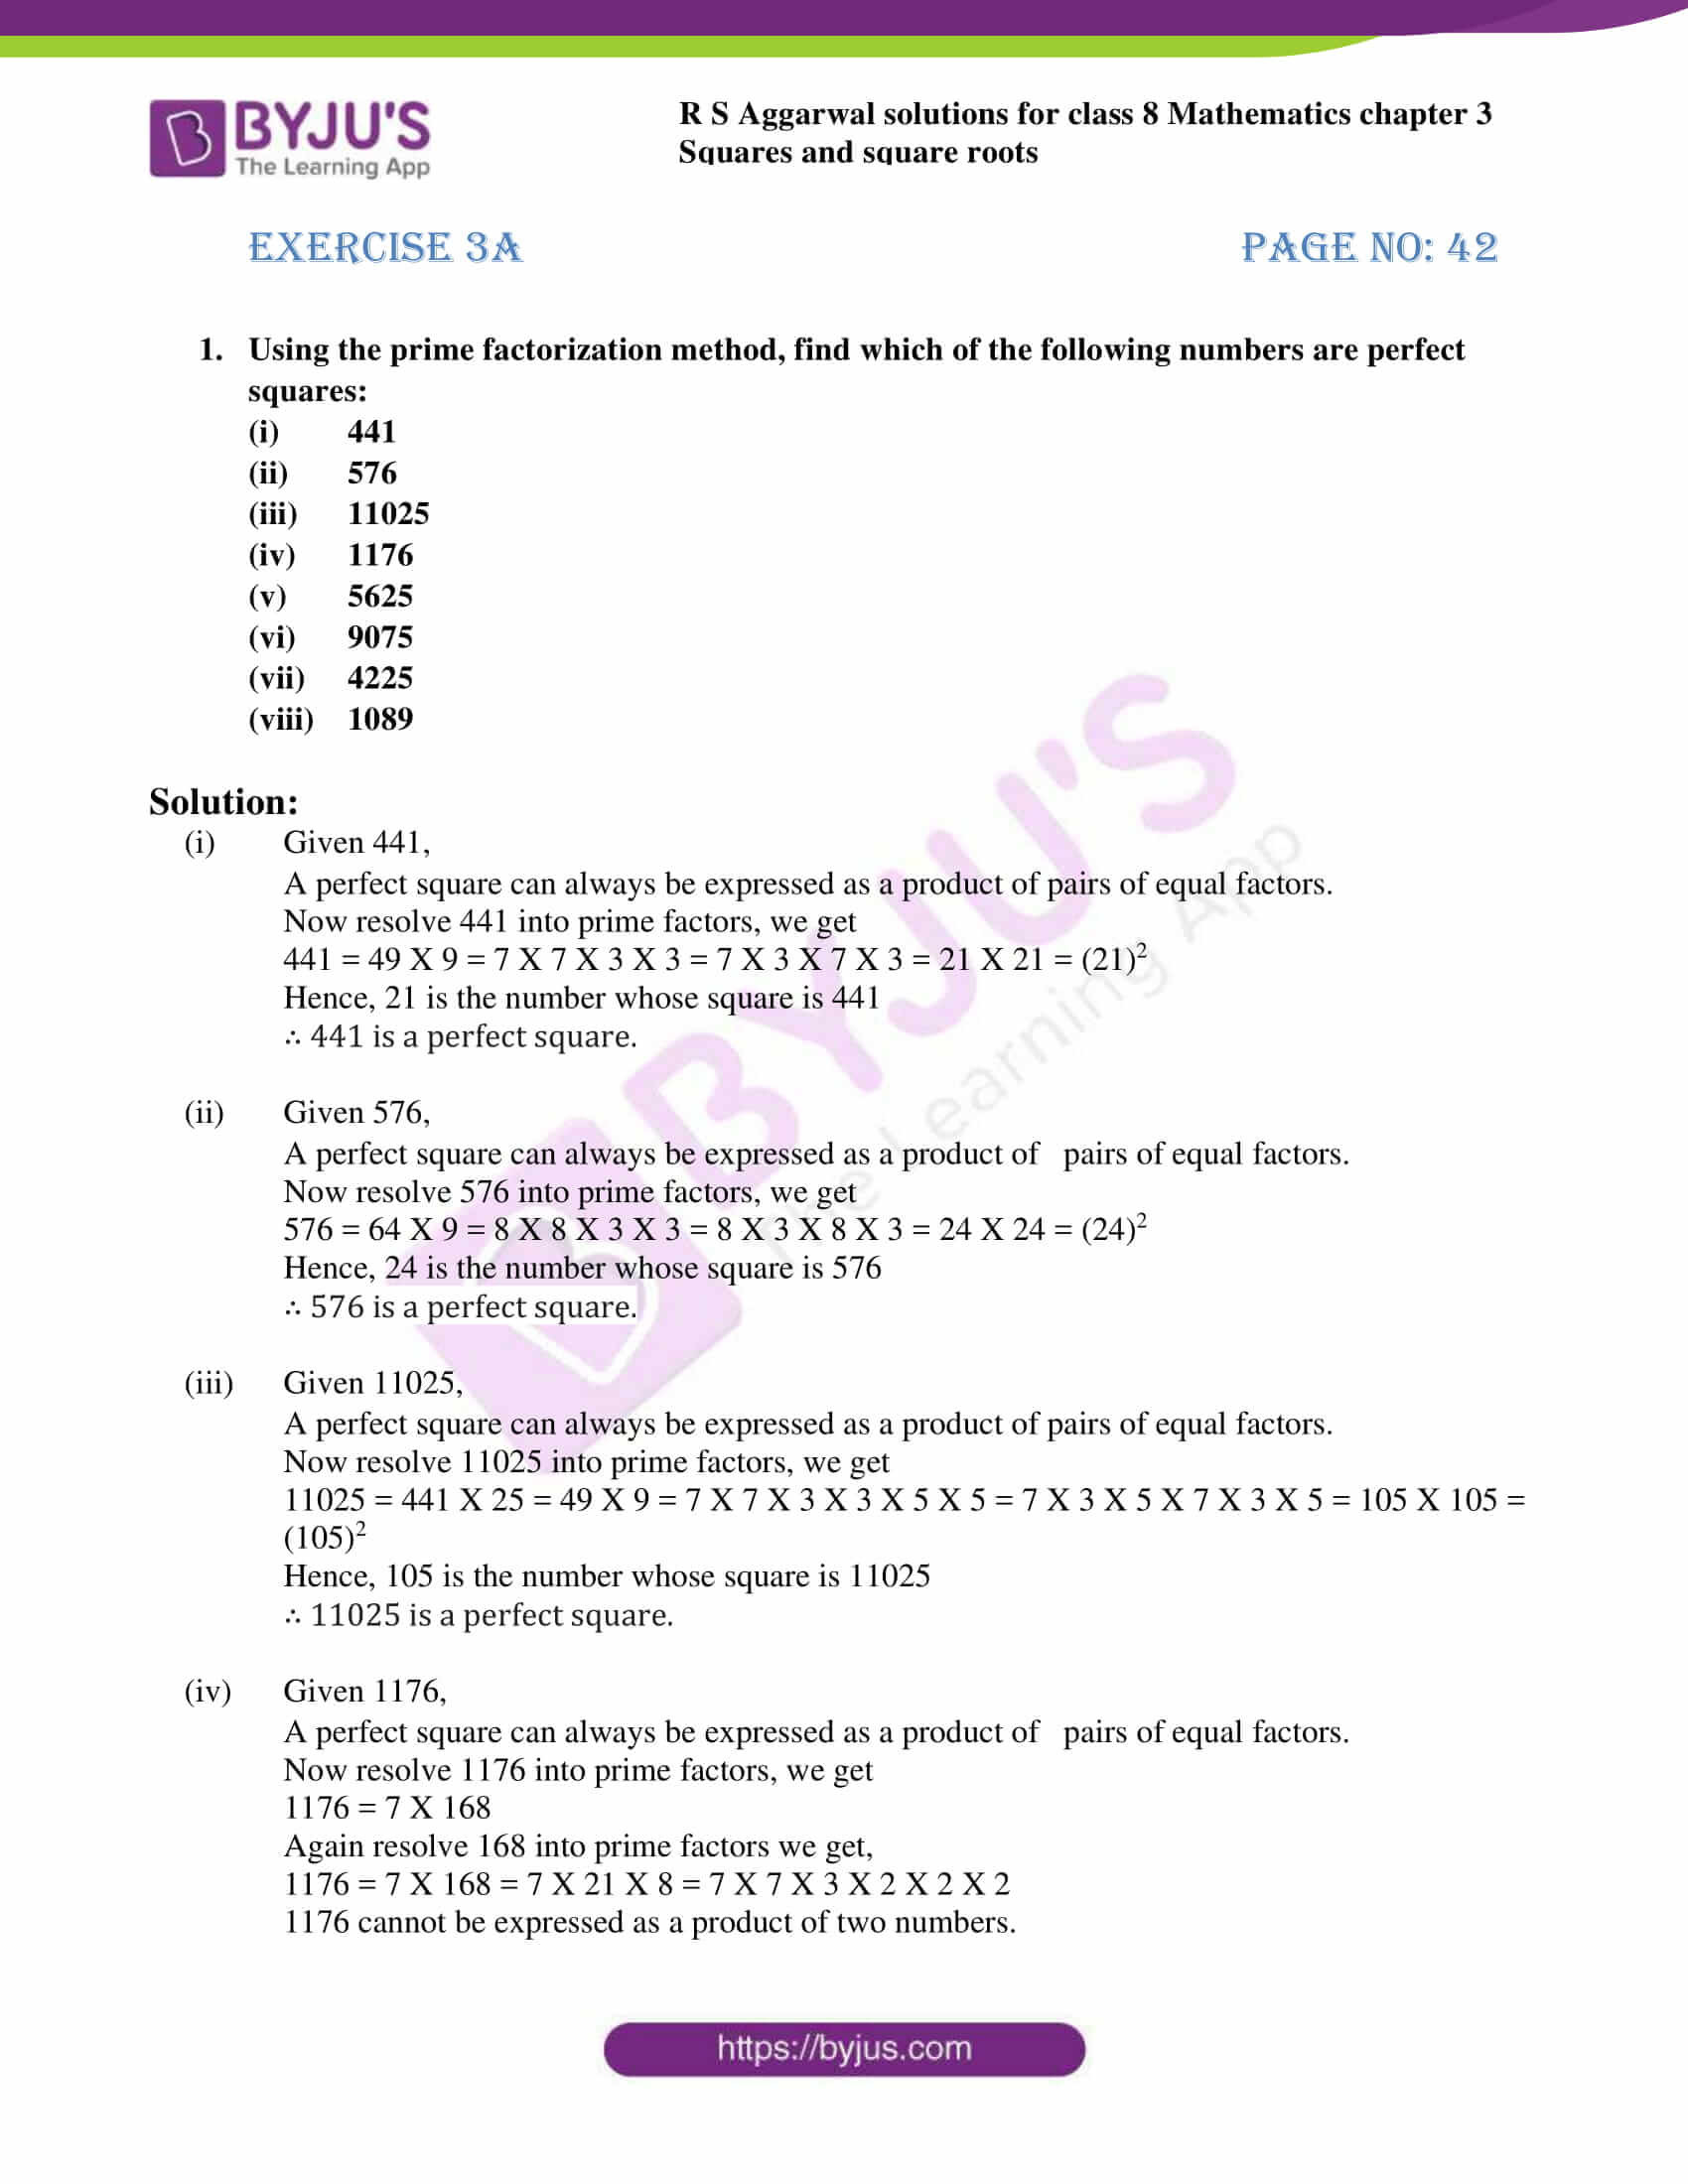 Square and Cube Roots Worksheet Rs Aggarwal solutions for Class 8 Chapter 3 Squares and